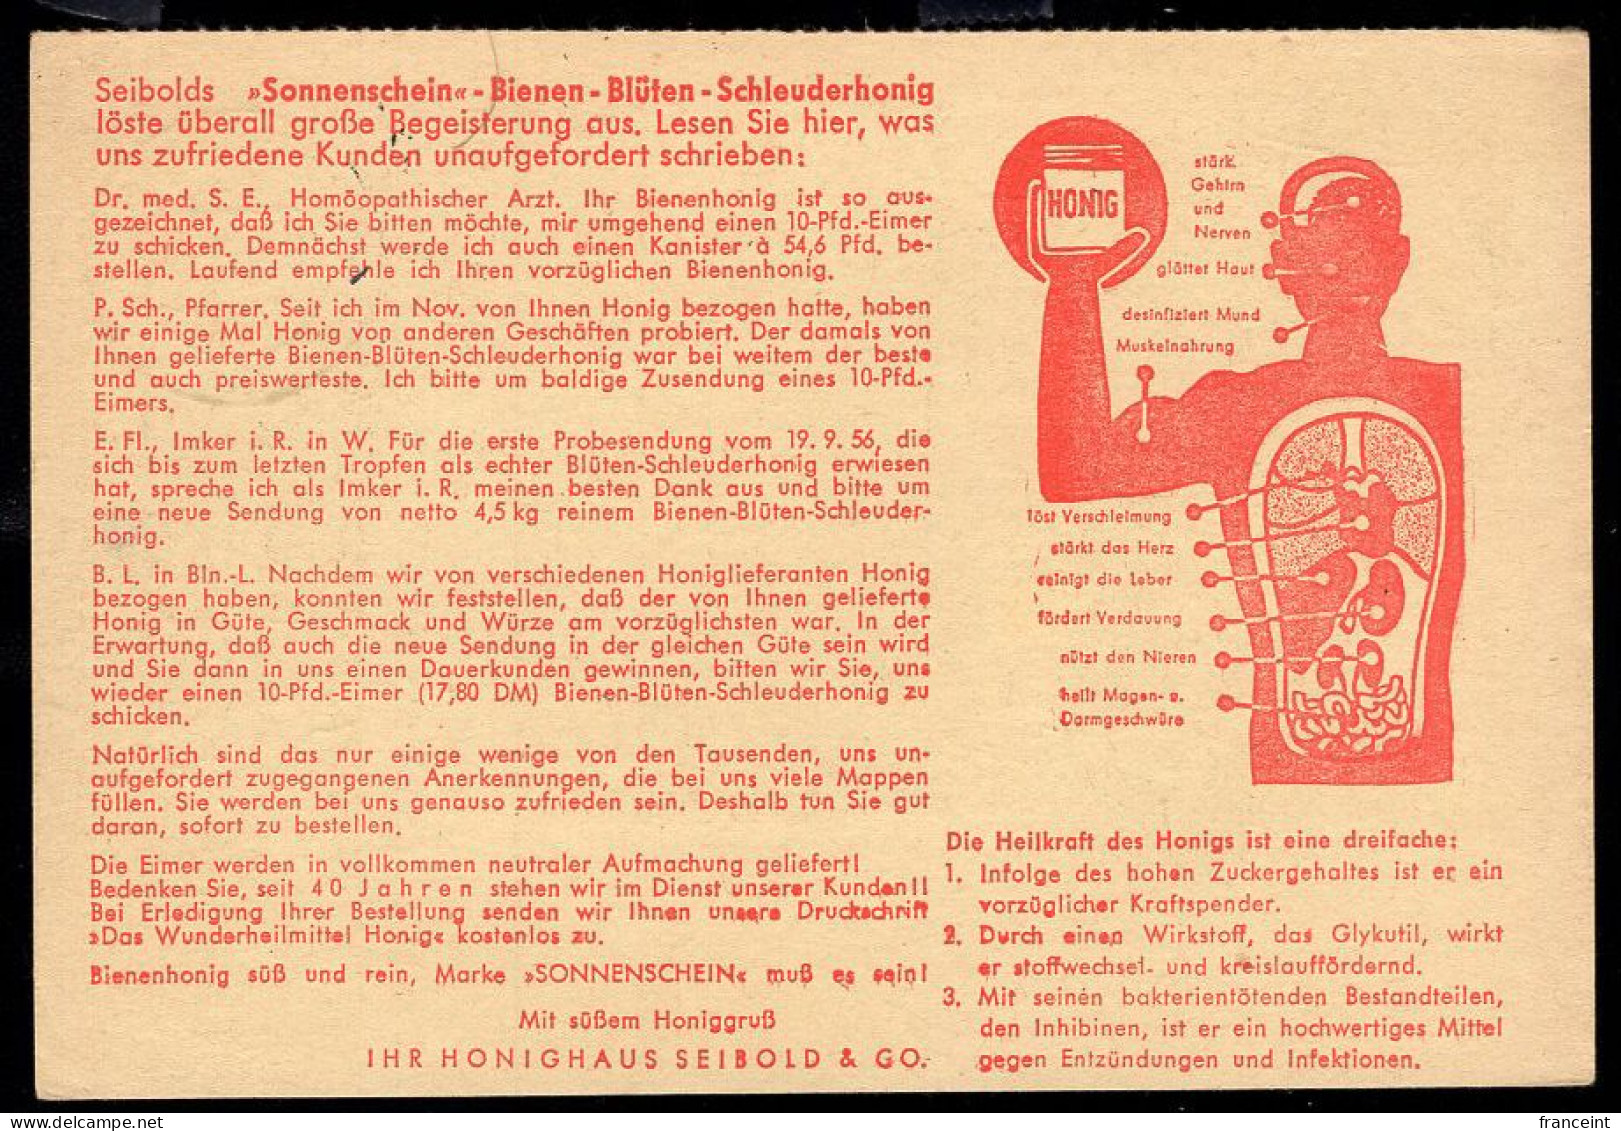 GERMANY(1956) Bee. Honey. Postpaid (by Recipient) Order Card For Various Honey Products Of Seibold & Co. - Bildpostkarten - Gebraucht